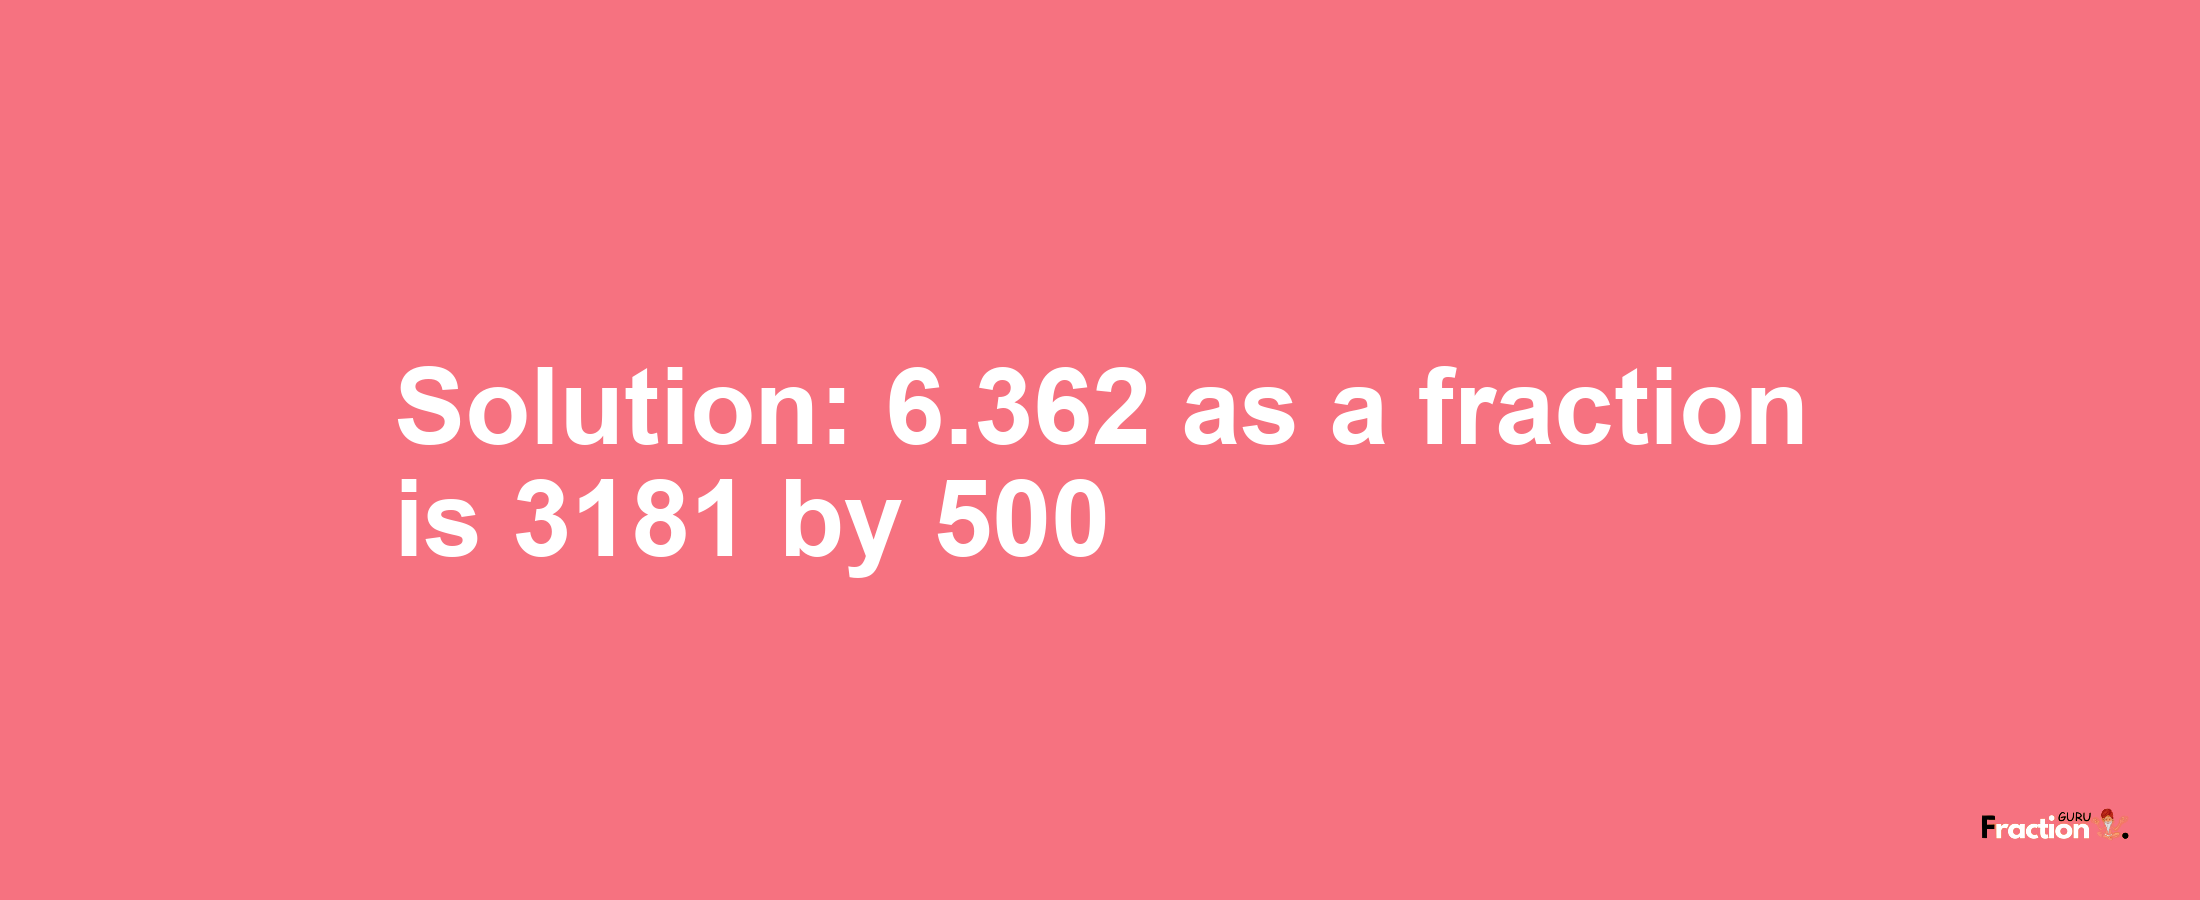 Solution:6.362 as a fraction is 3181/500